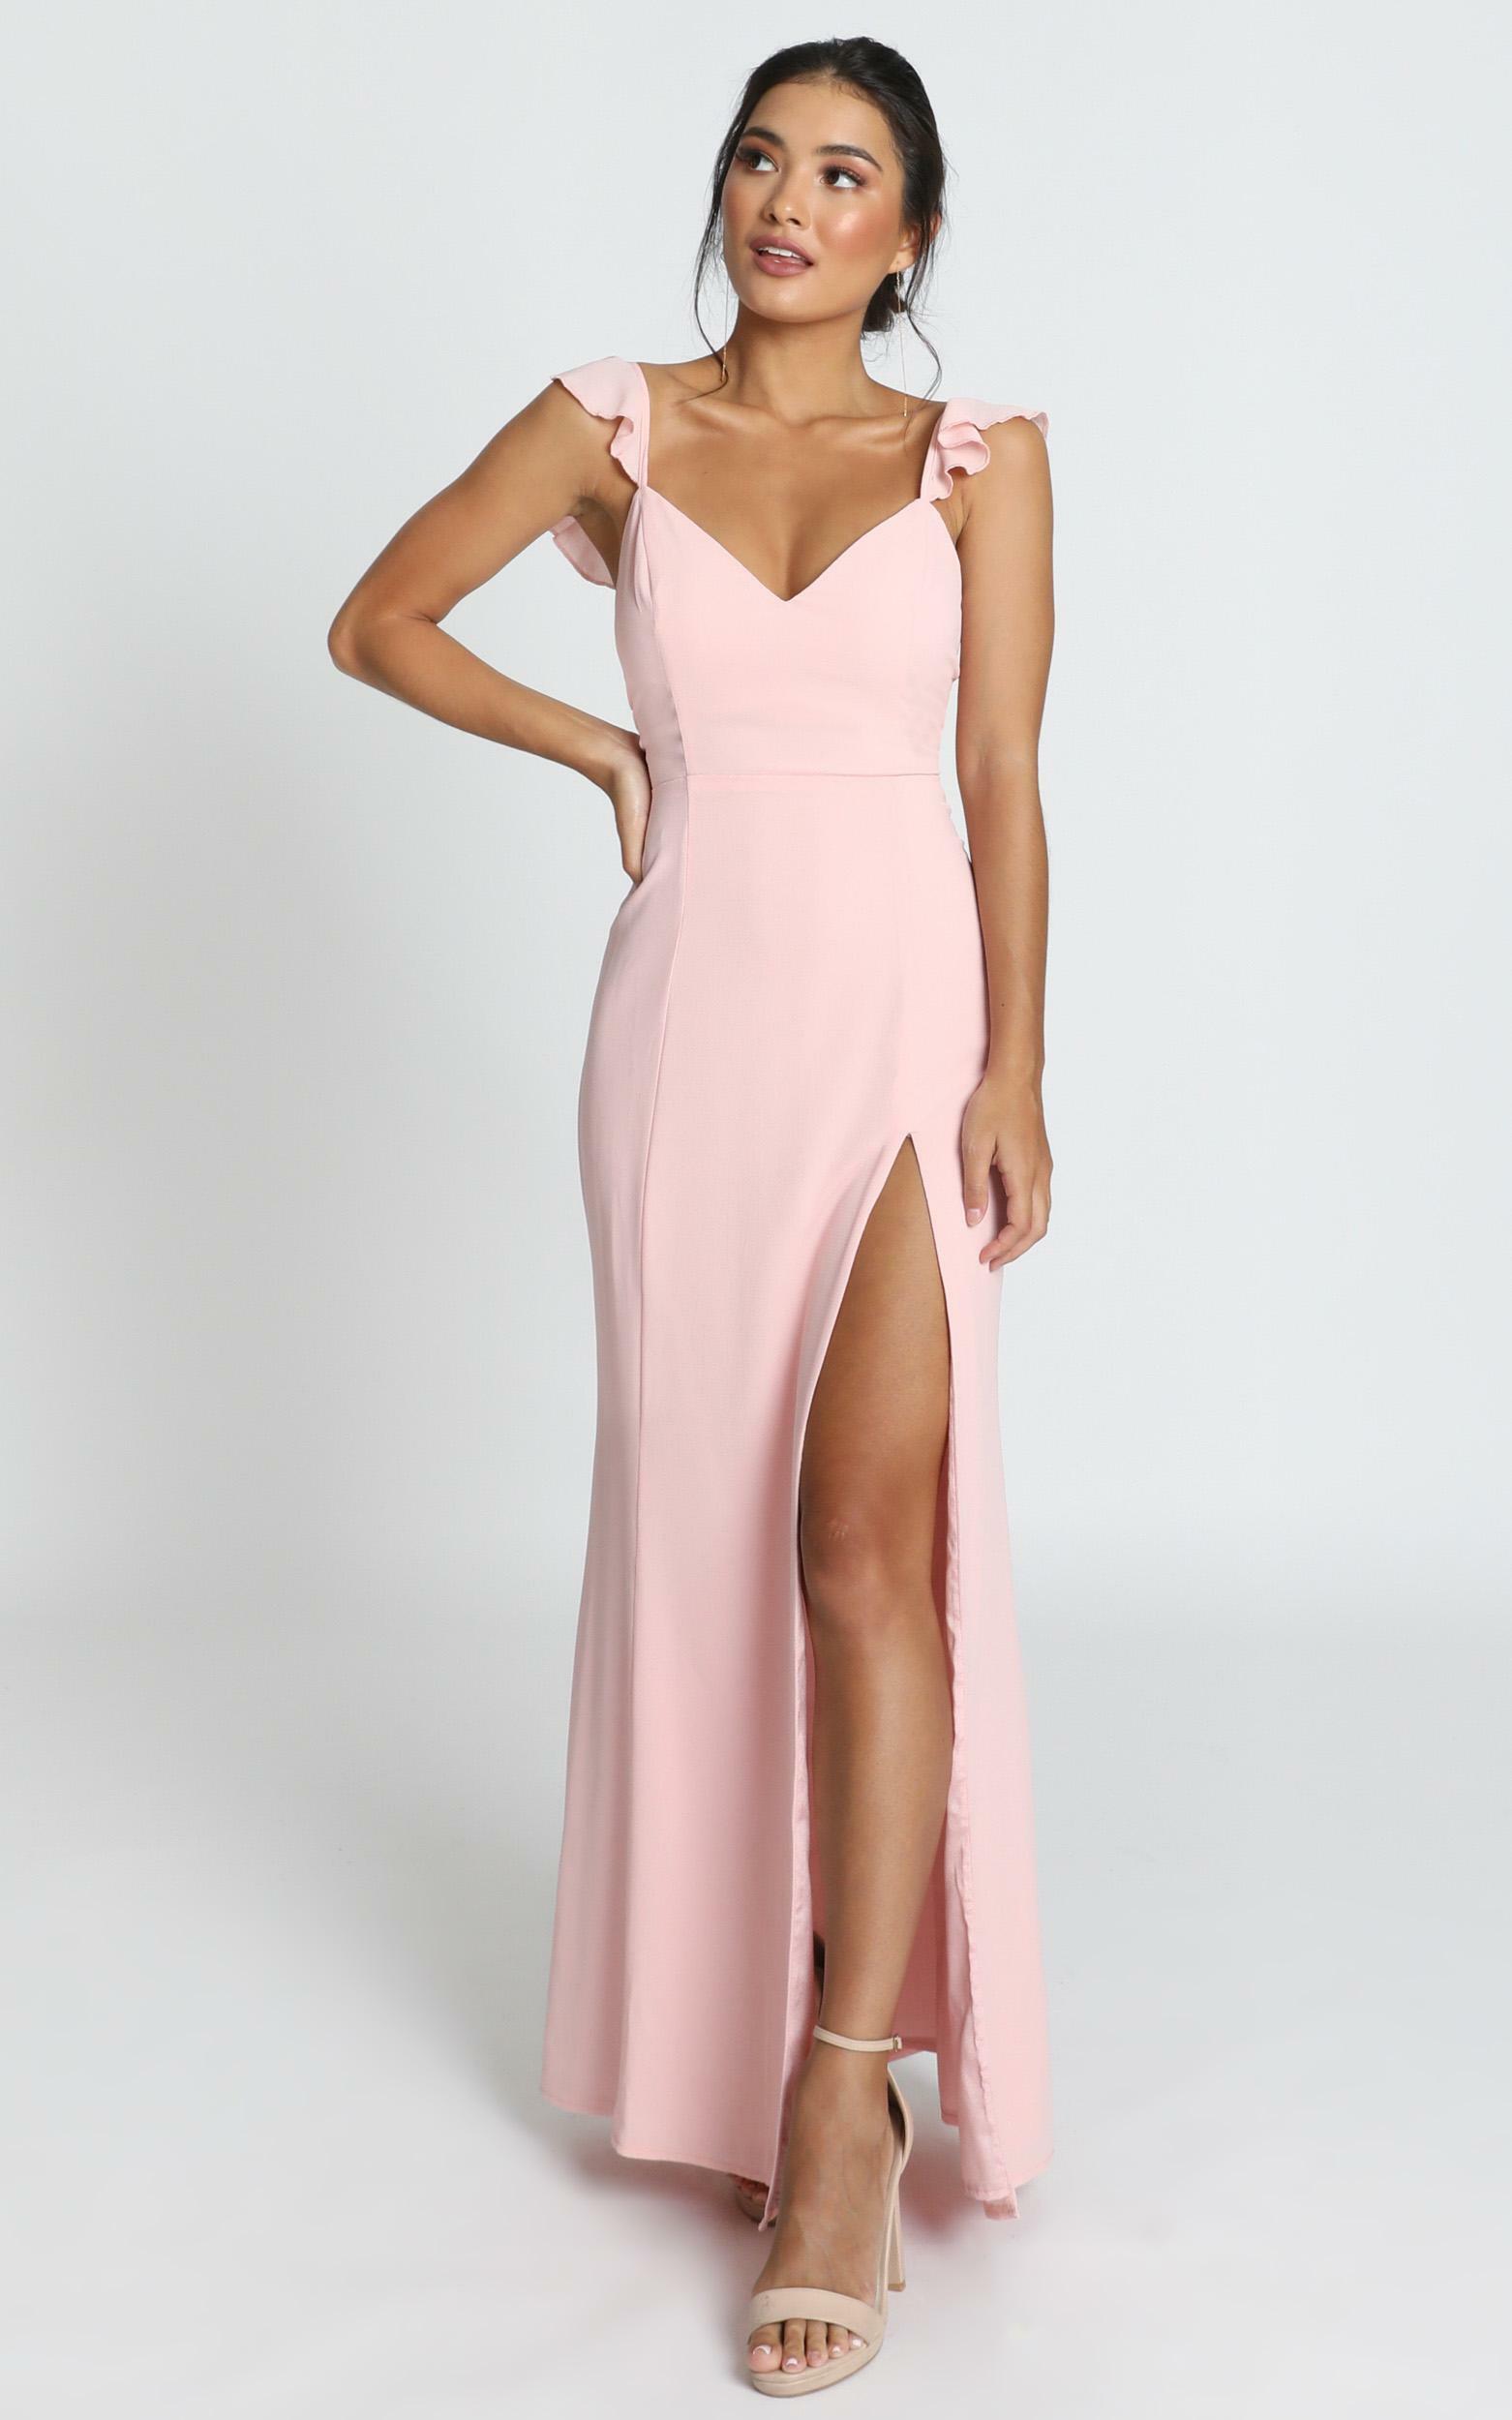 More Than This Ruffle Strap Maxi Dress in Blush - 06, PNK1, hi-res image number null